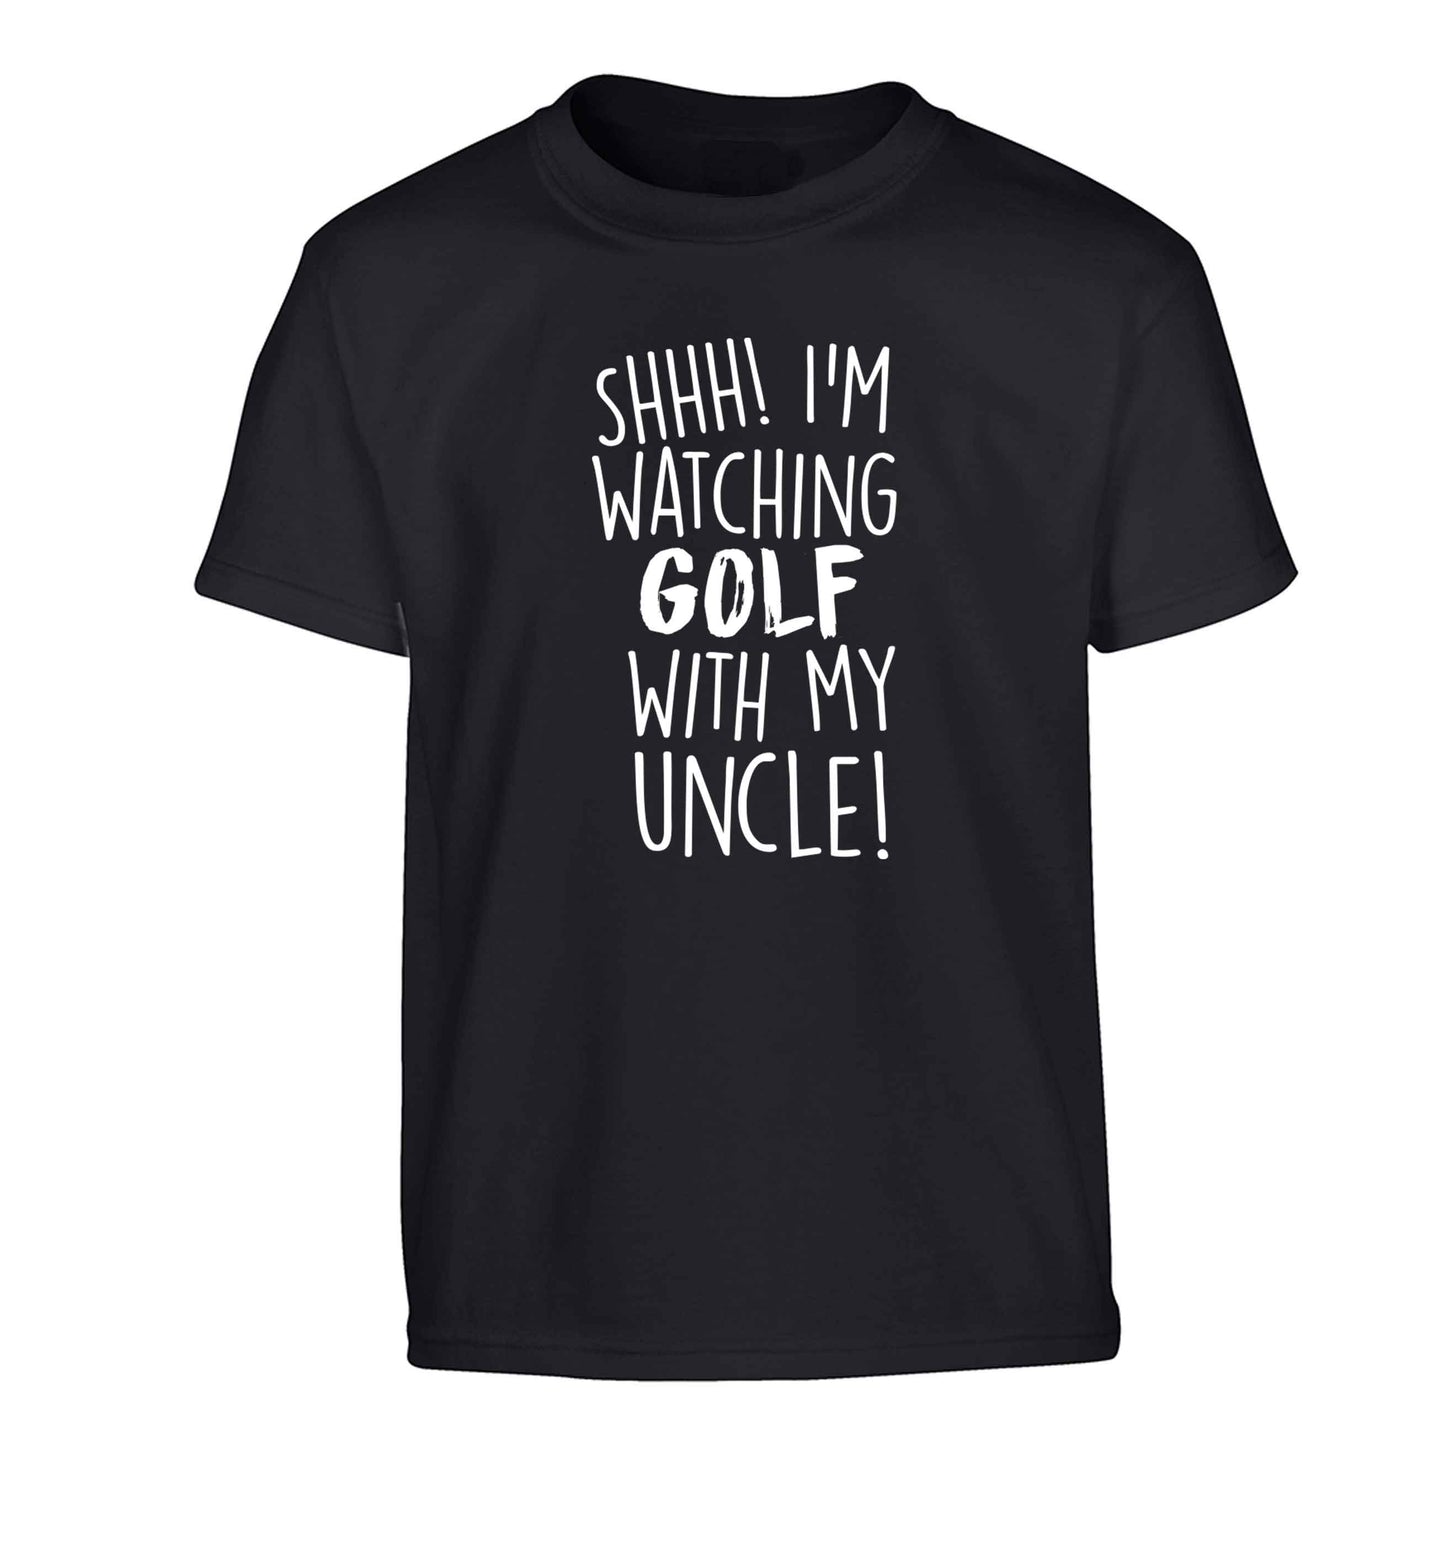 Shh I'm watching golf with my uncle Children's black Tshirt 12-13 Years